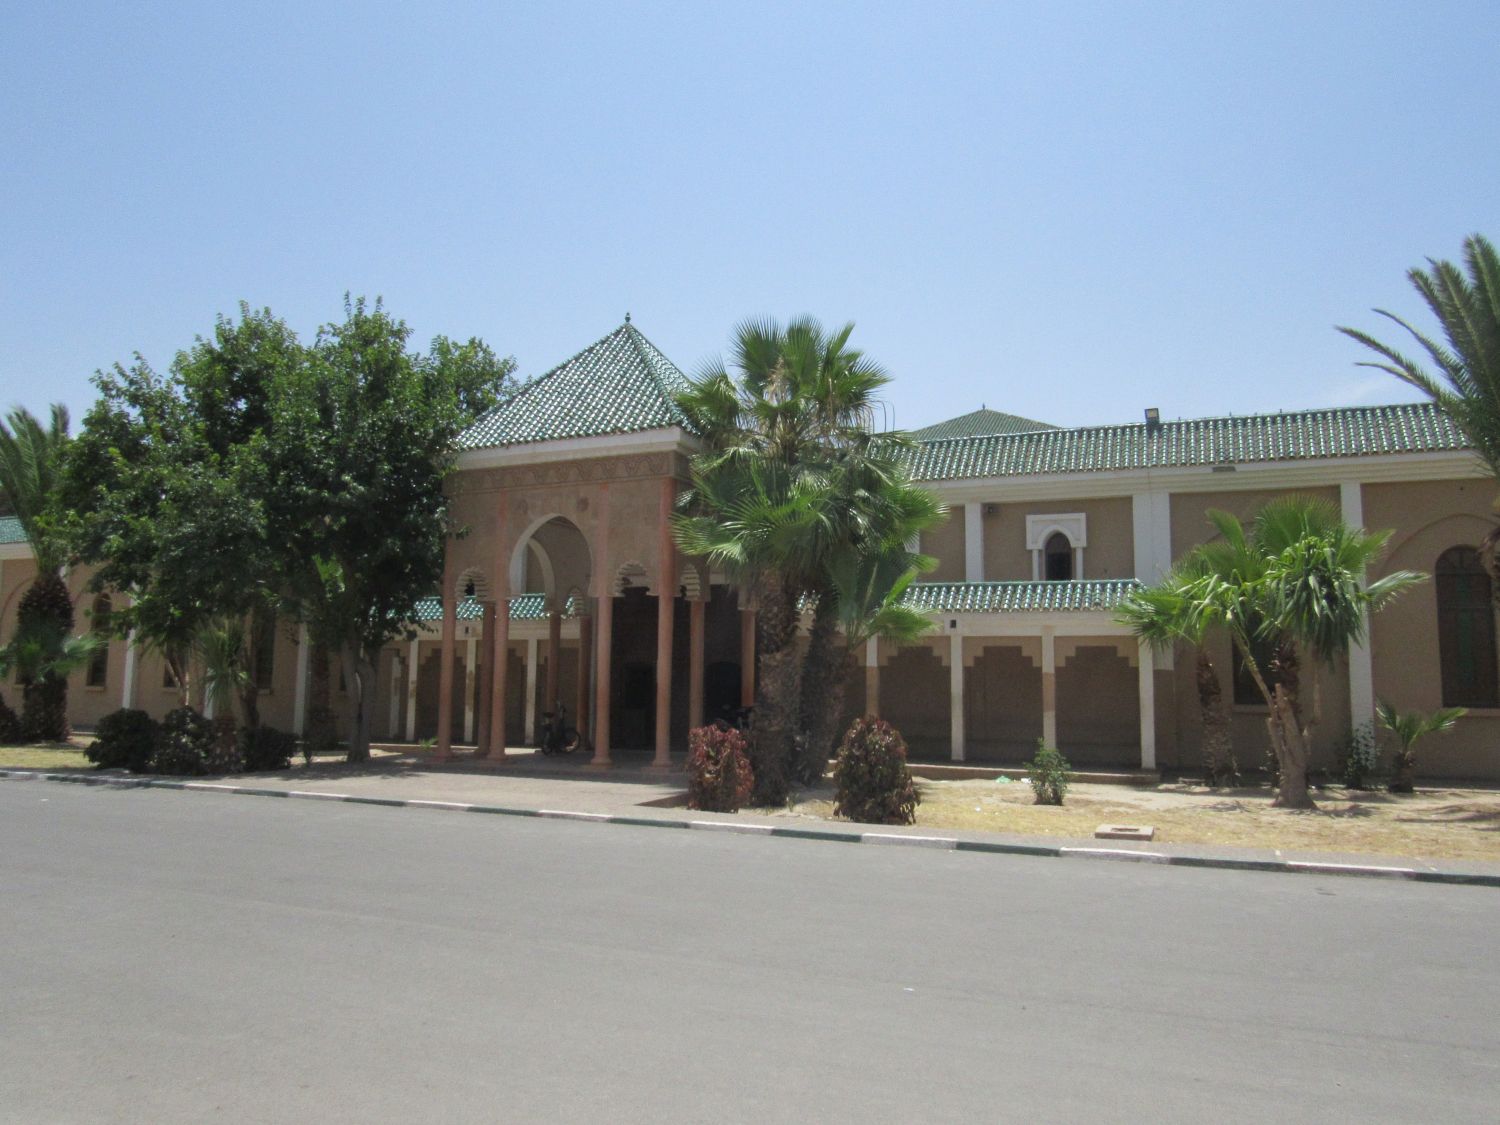 Exterior view of the mosque from across the road